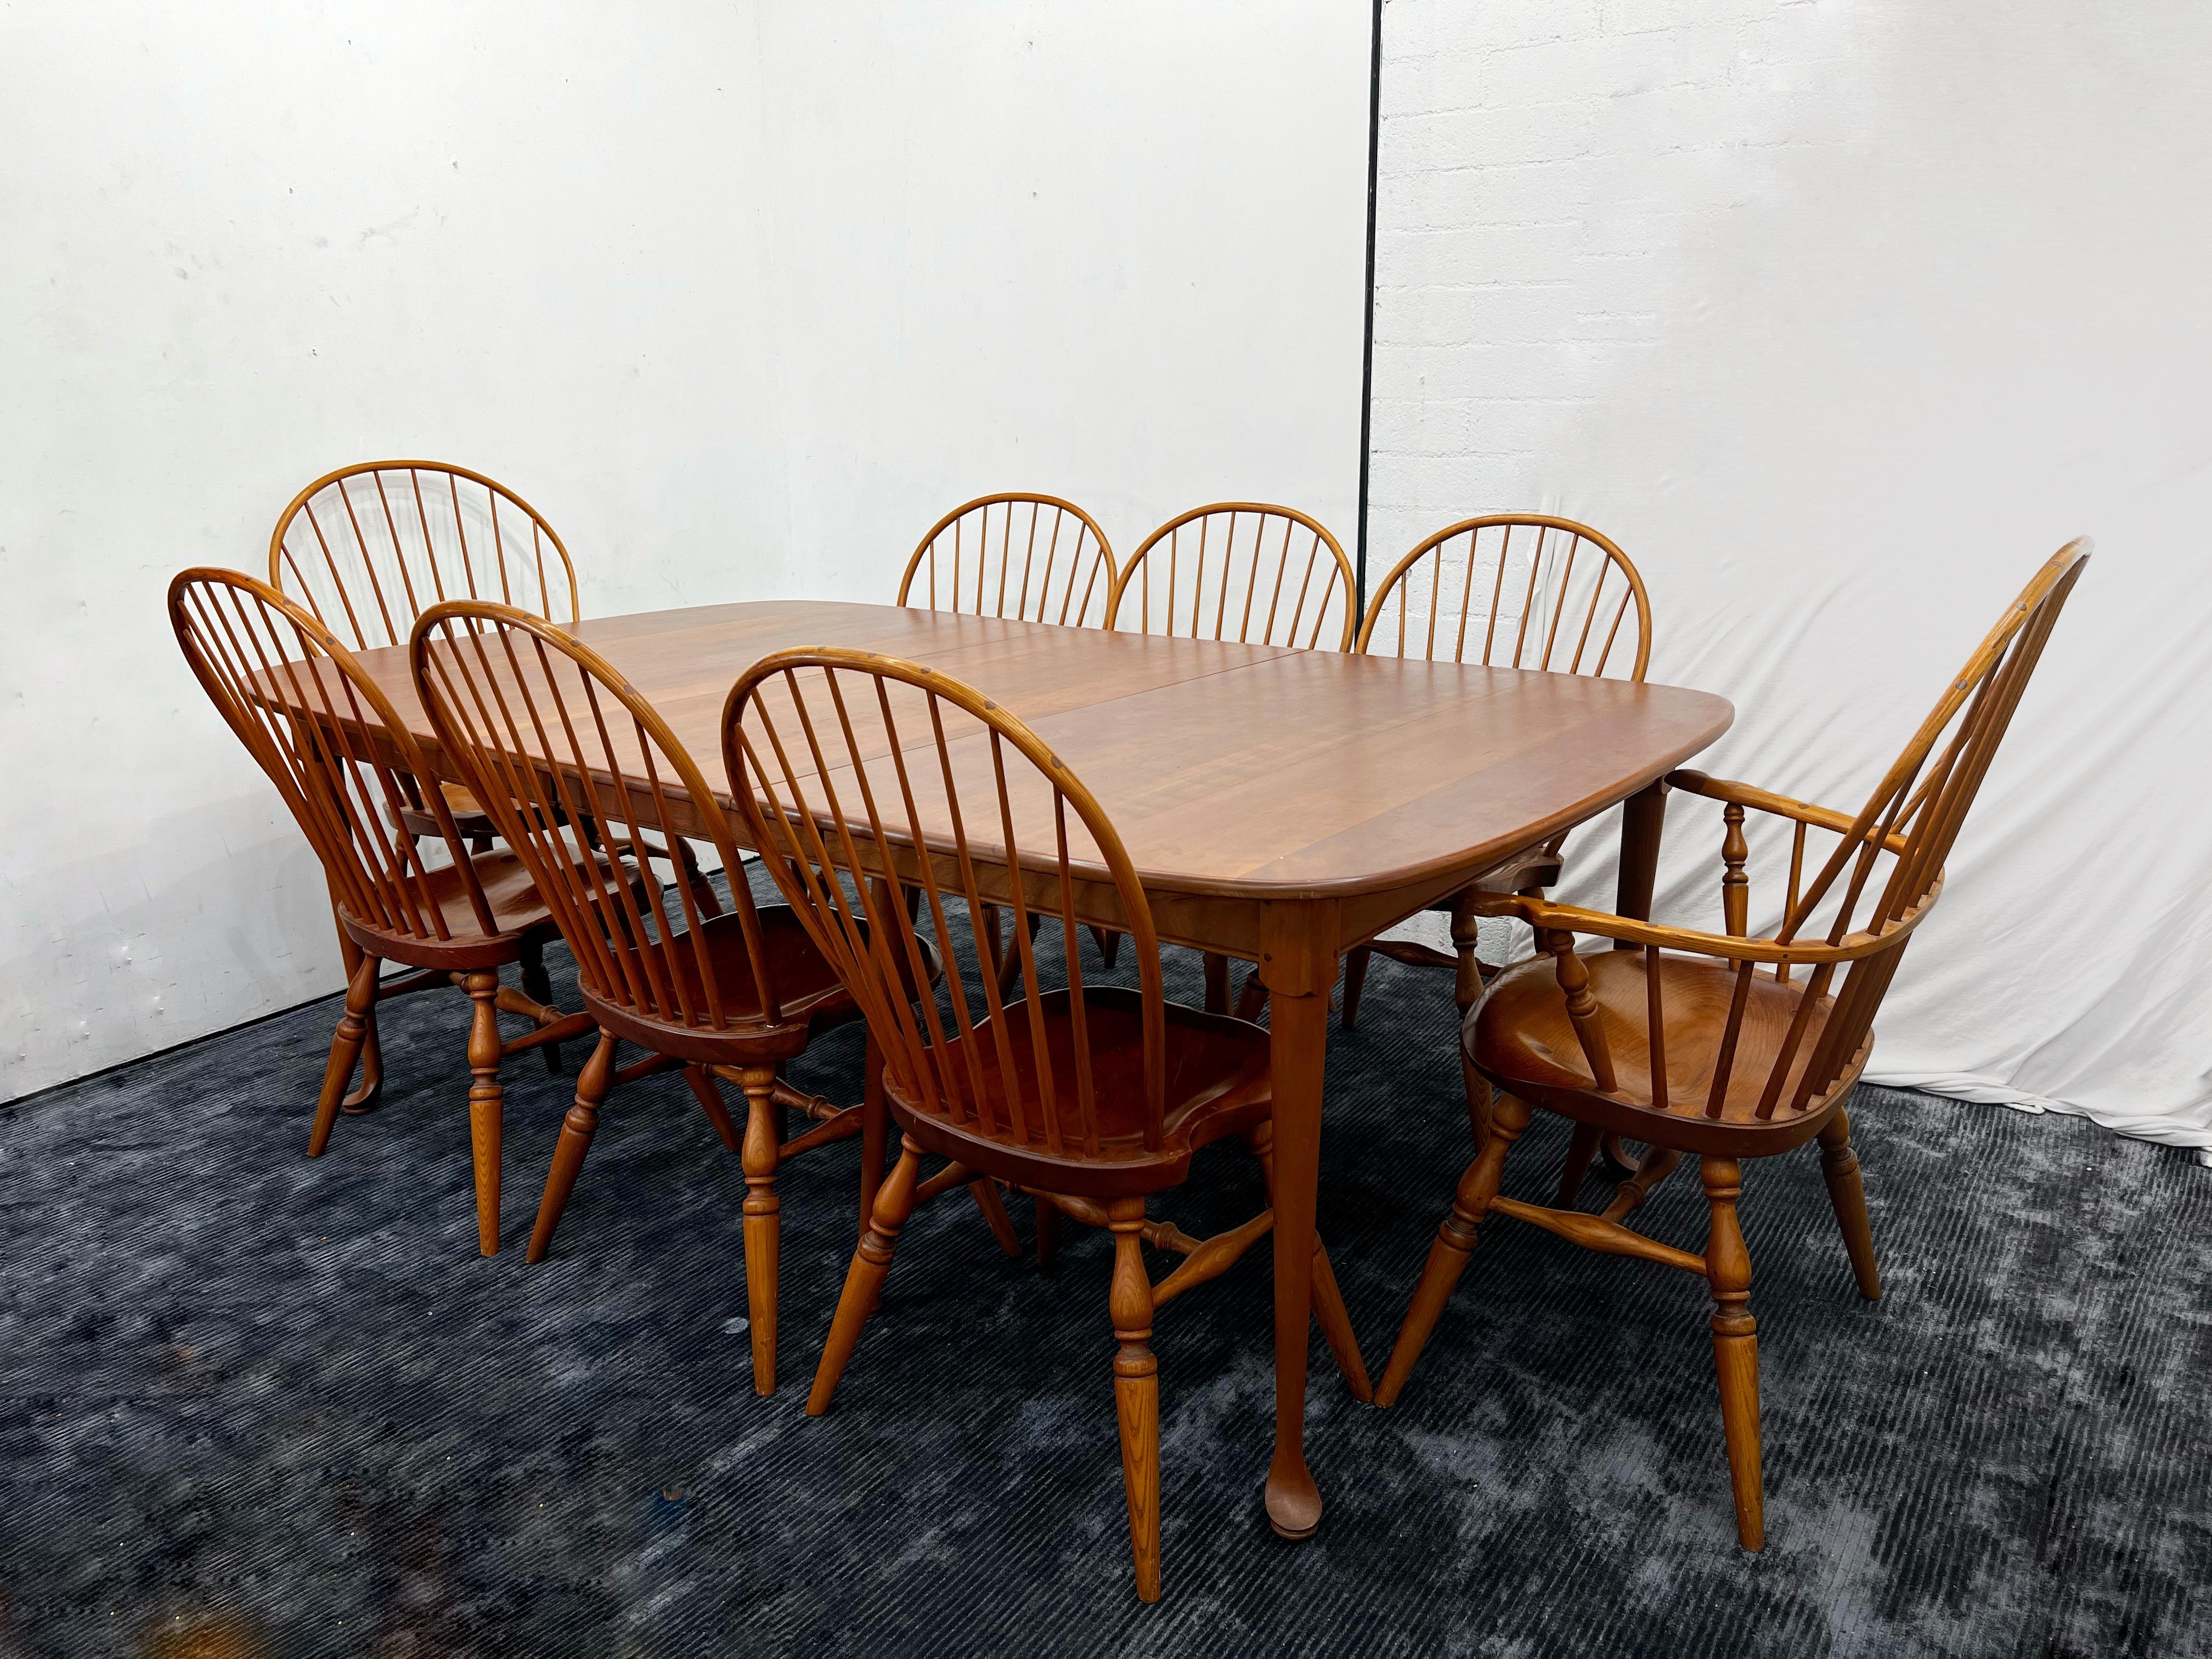 Hand crafted in Lincolnville, Maine.
Extra deep, intricate joinery adds an incredible level of stability and strength. Maker’s stamp can be found on the underside of each chair. 

Side chairs: 

Seat height 17”
Backrest 37 1/4 
16 3/4” D x 16